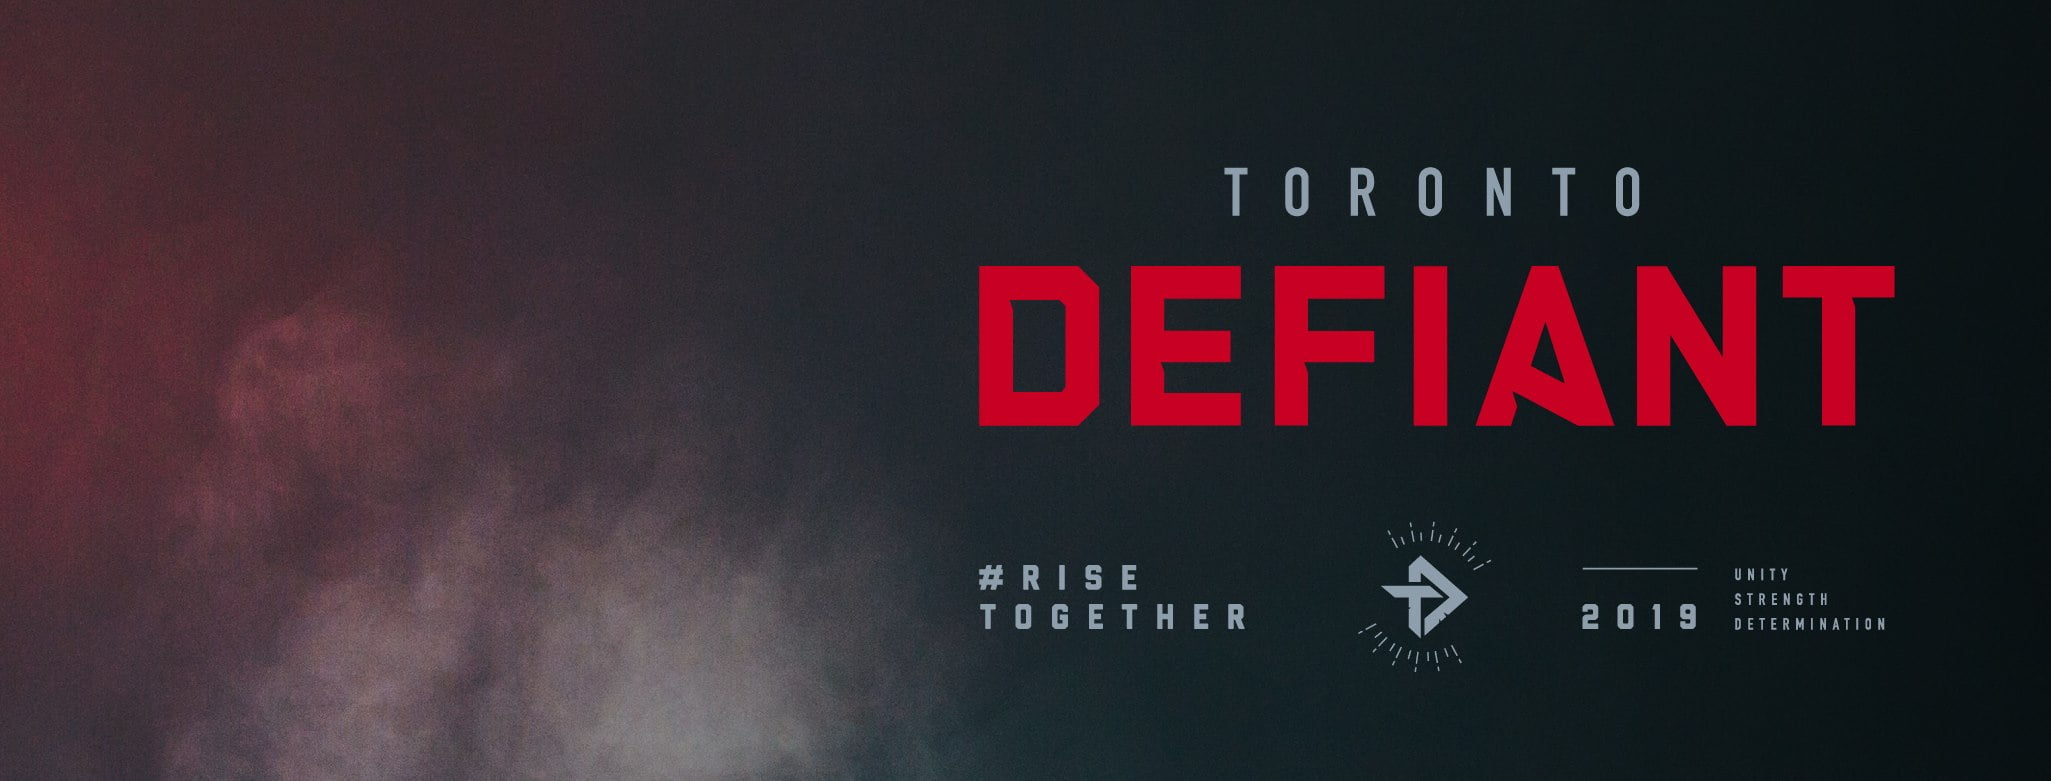 Toronto Defiant Launches As Canada's Newest Professional Esports Team 9